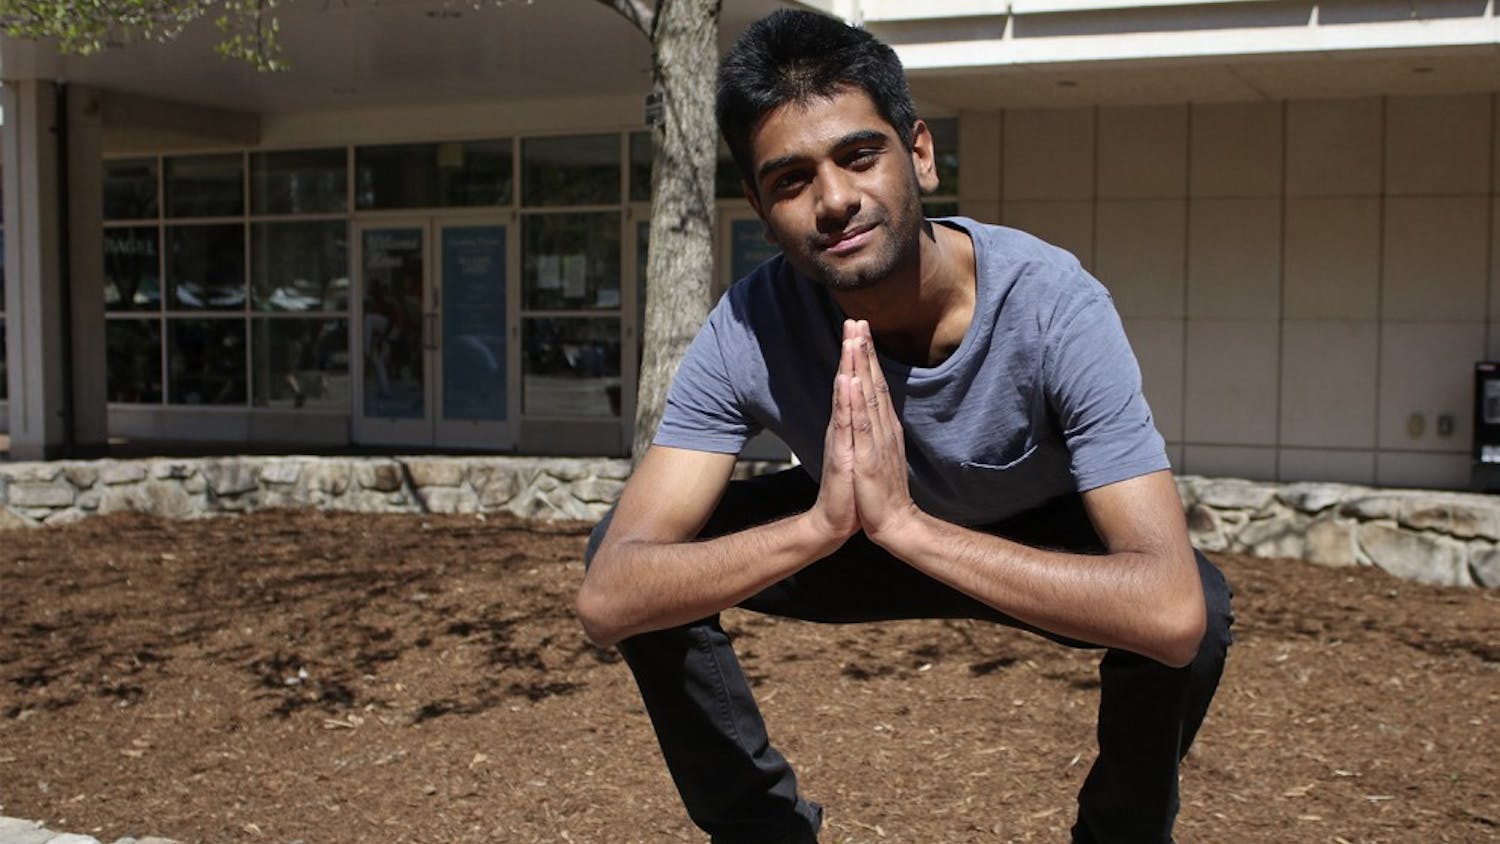 Vivek Menon is a UNC-Chapel Hill student and rapper who will be dropping an album soon.